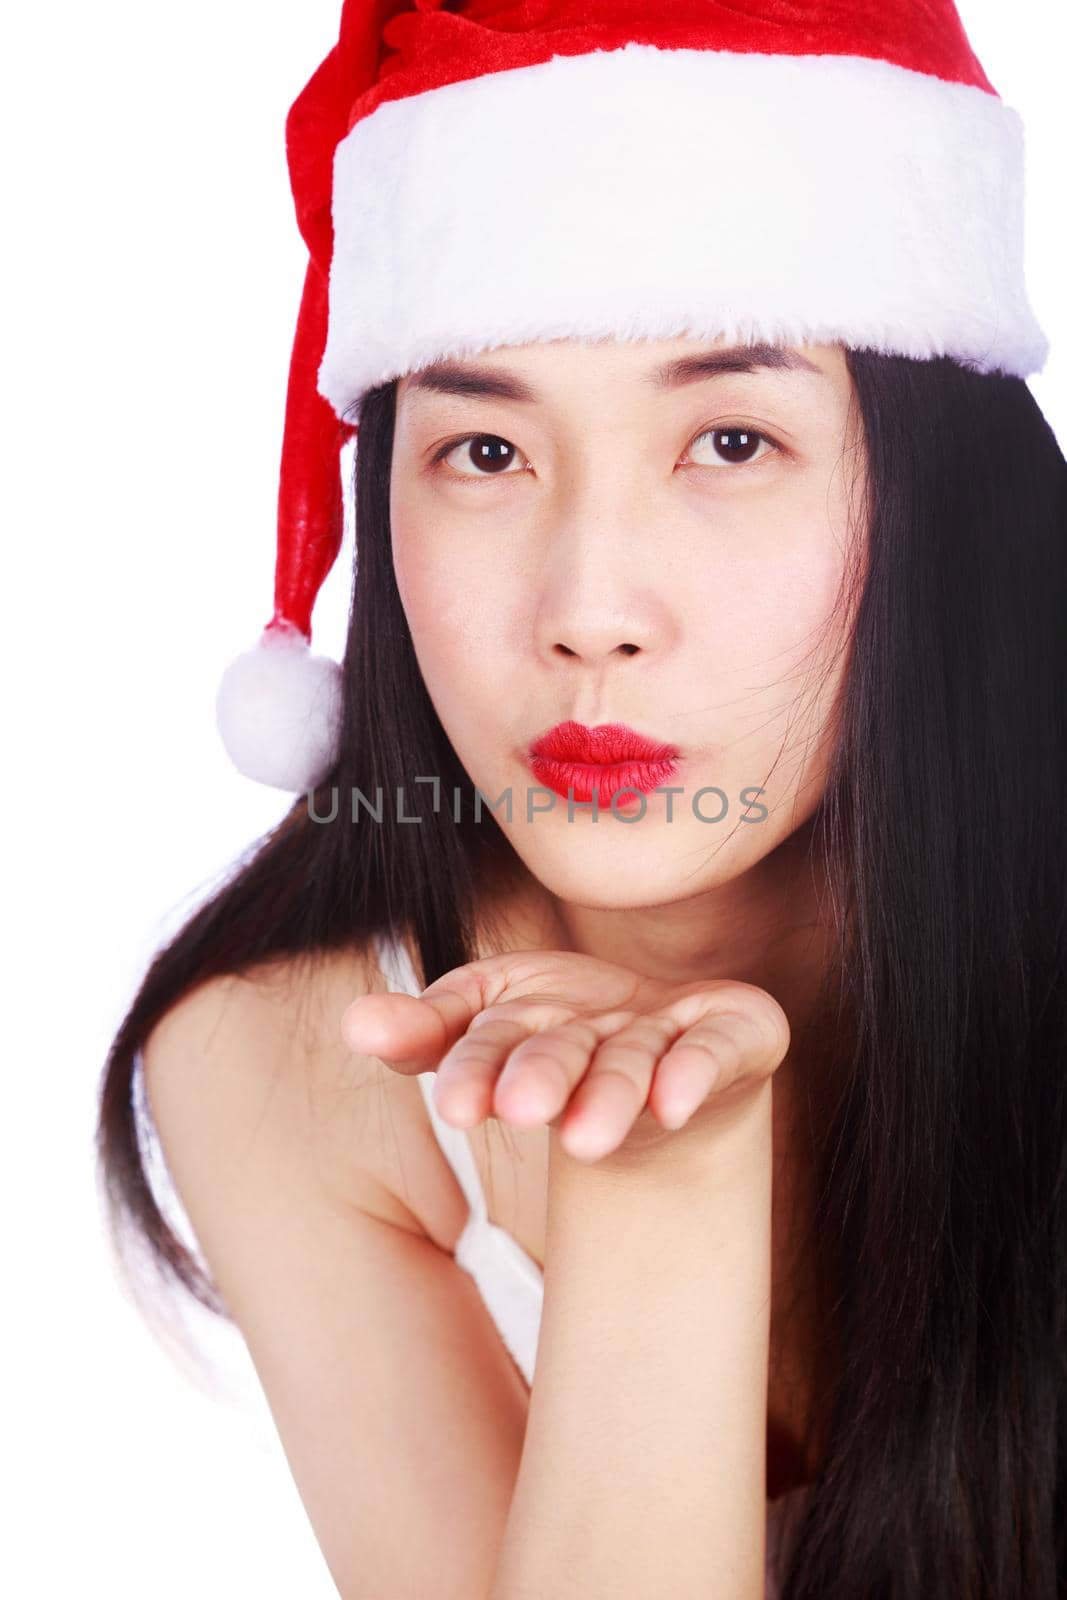 happy woman in Santa Claus clothes isolated on a white background